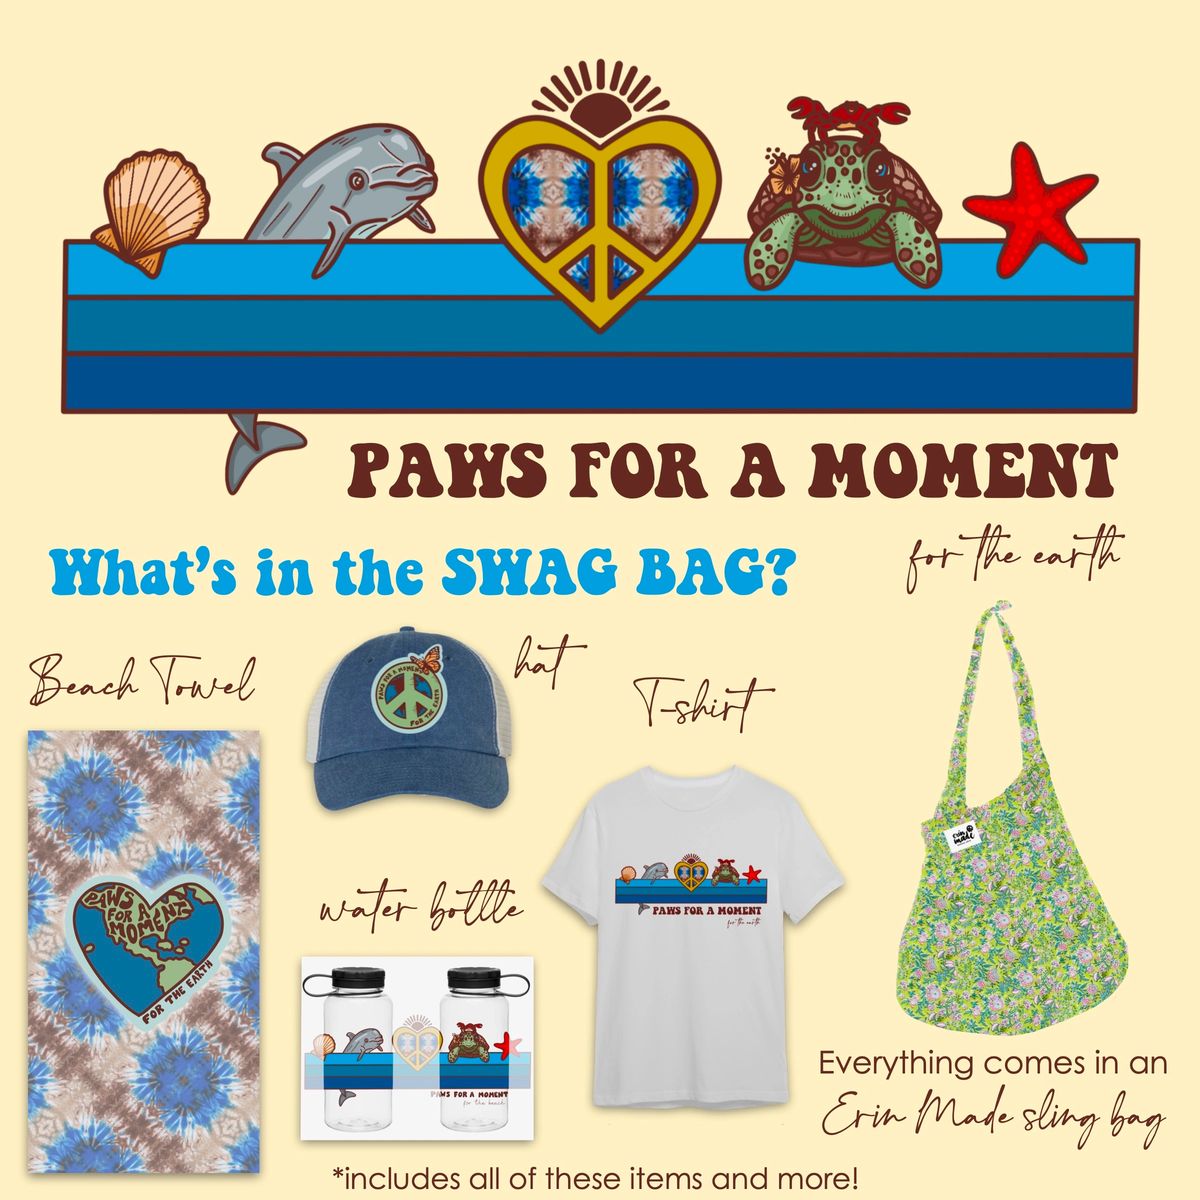 FOR THE EARTH - PAWS FOR A MOMENT SWAG BAG